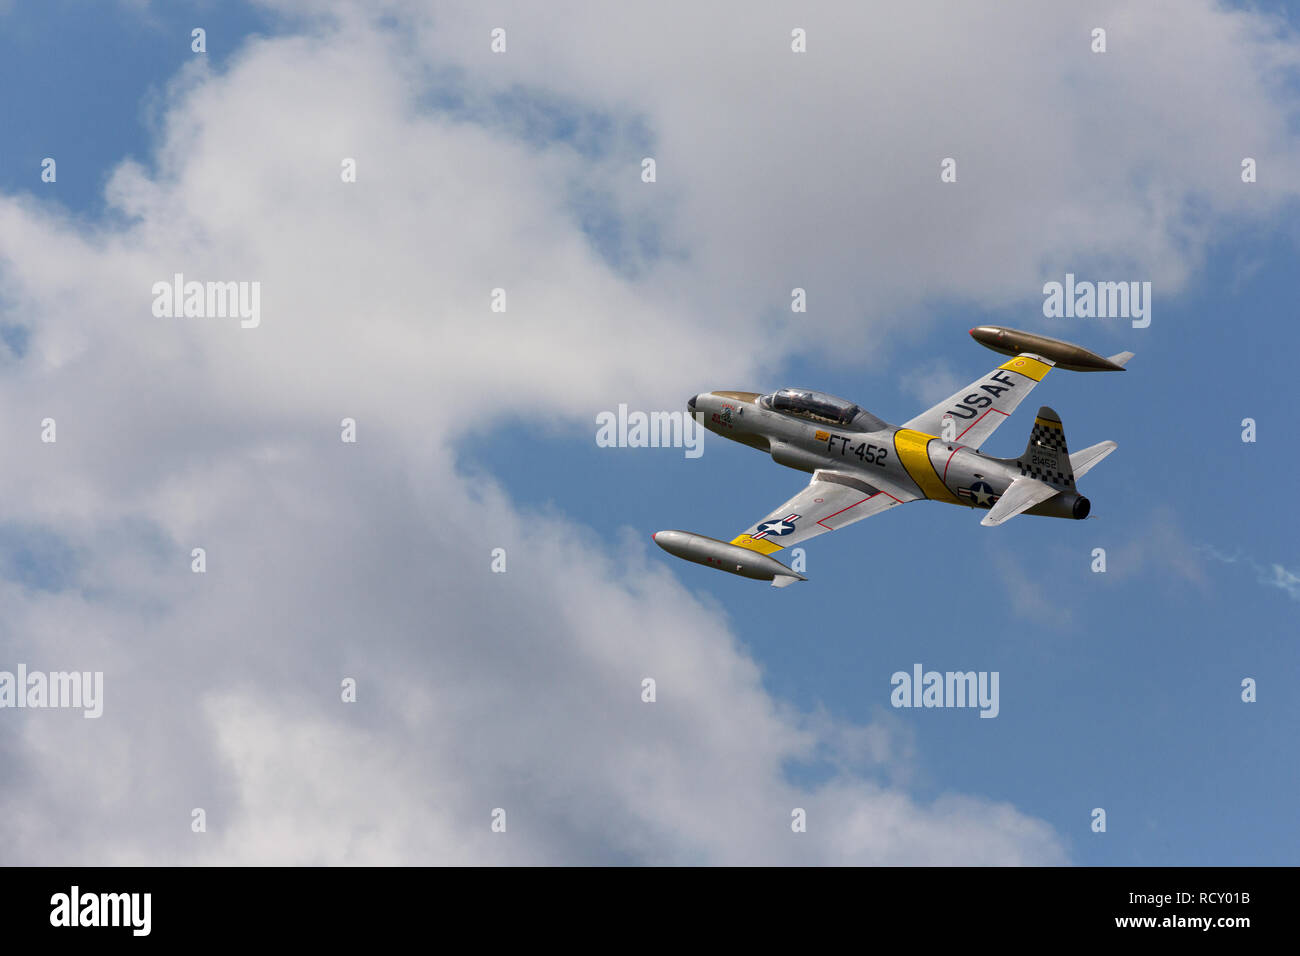 Lockheed T-33 Shooting Star un American getto subsonico trainer in volo air show Foto Stock